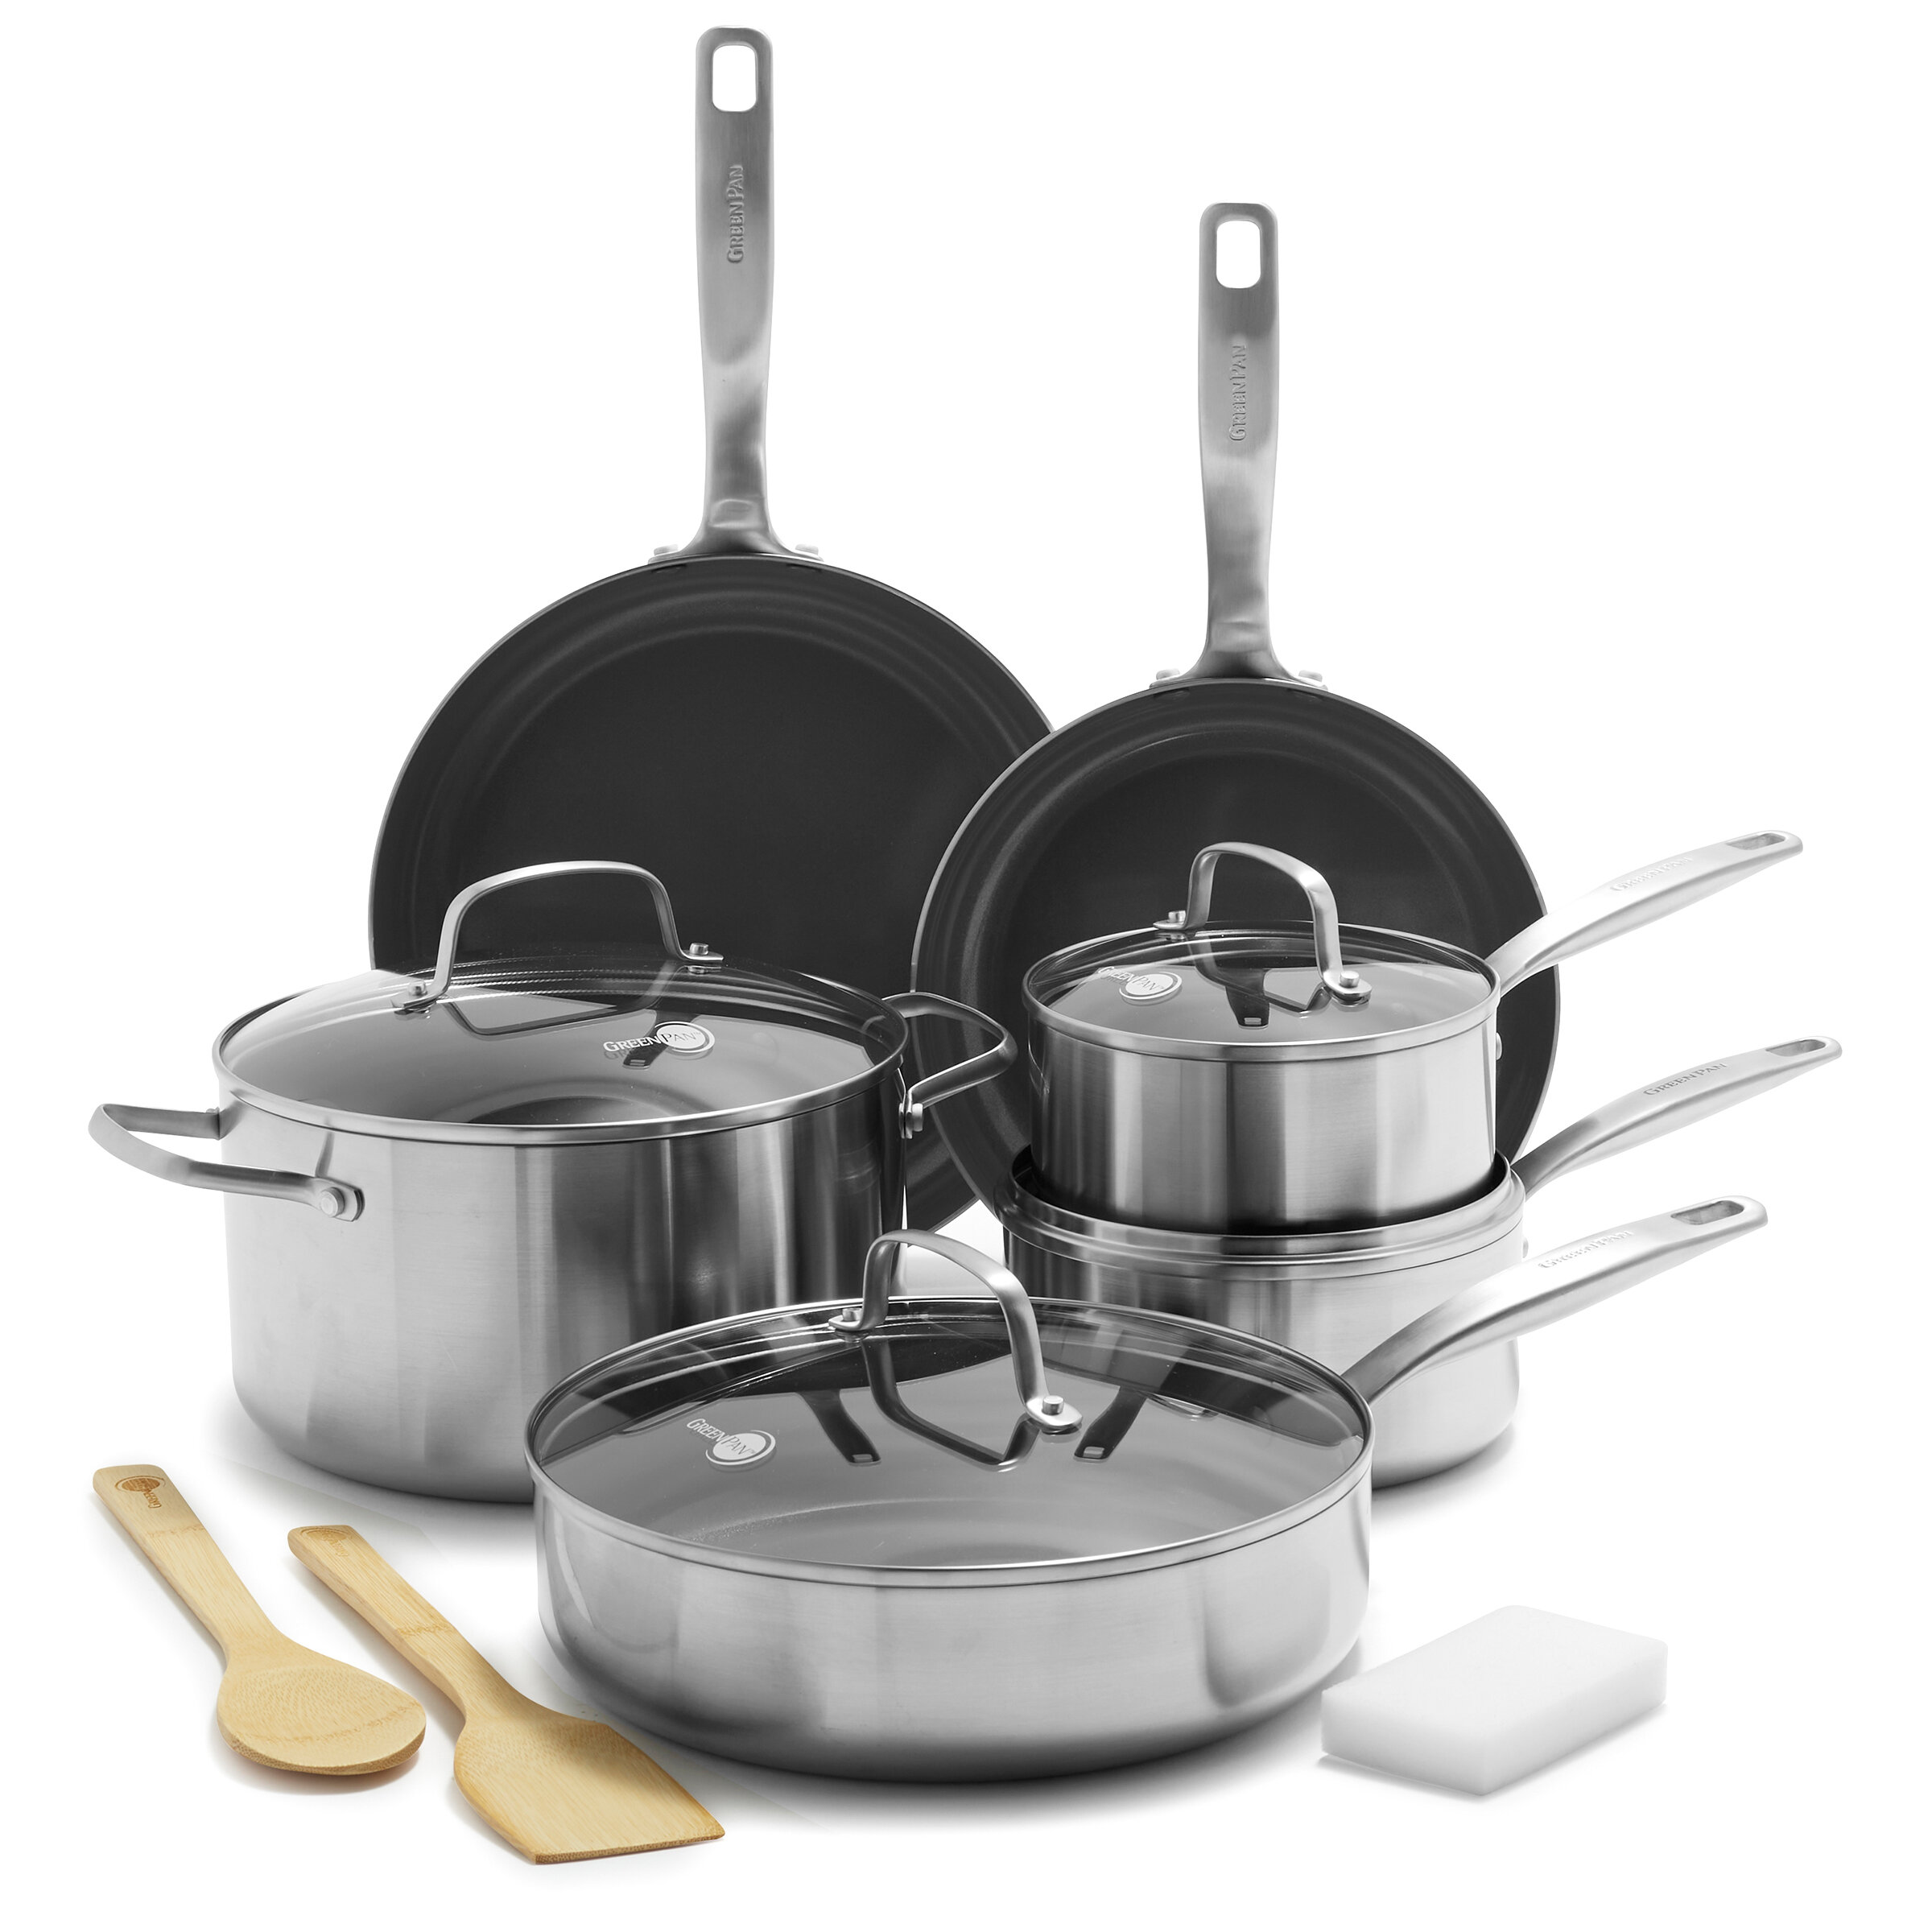 Set of 12 pots and pans made of stainless steel. 